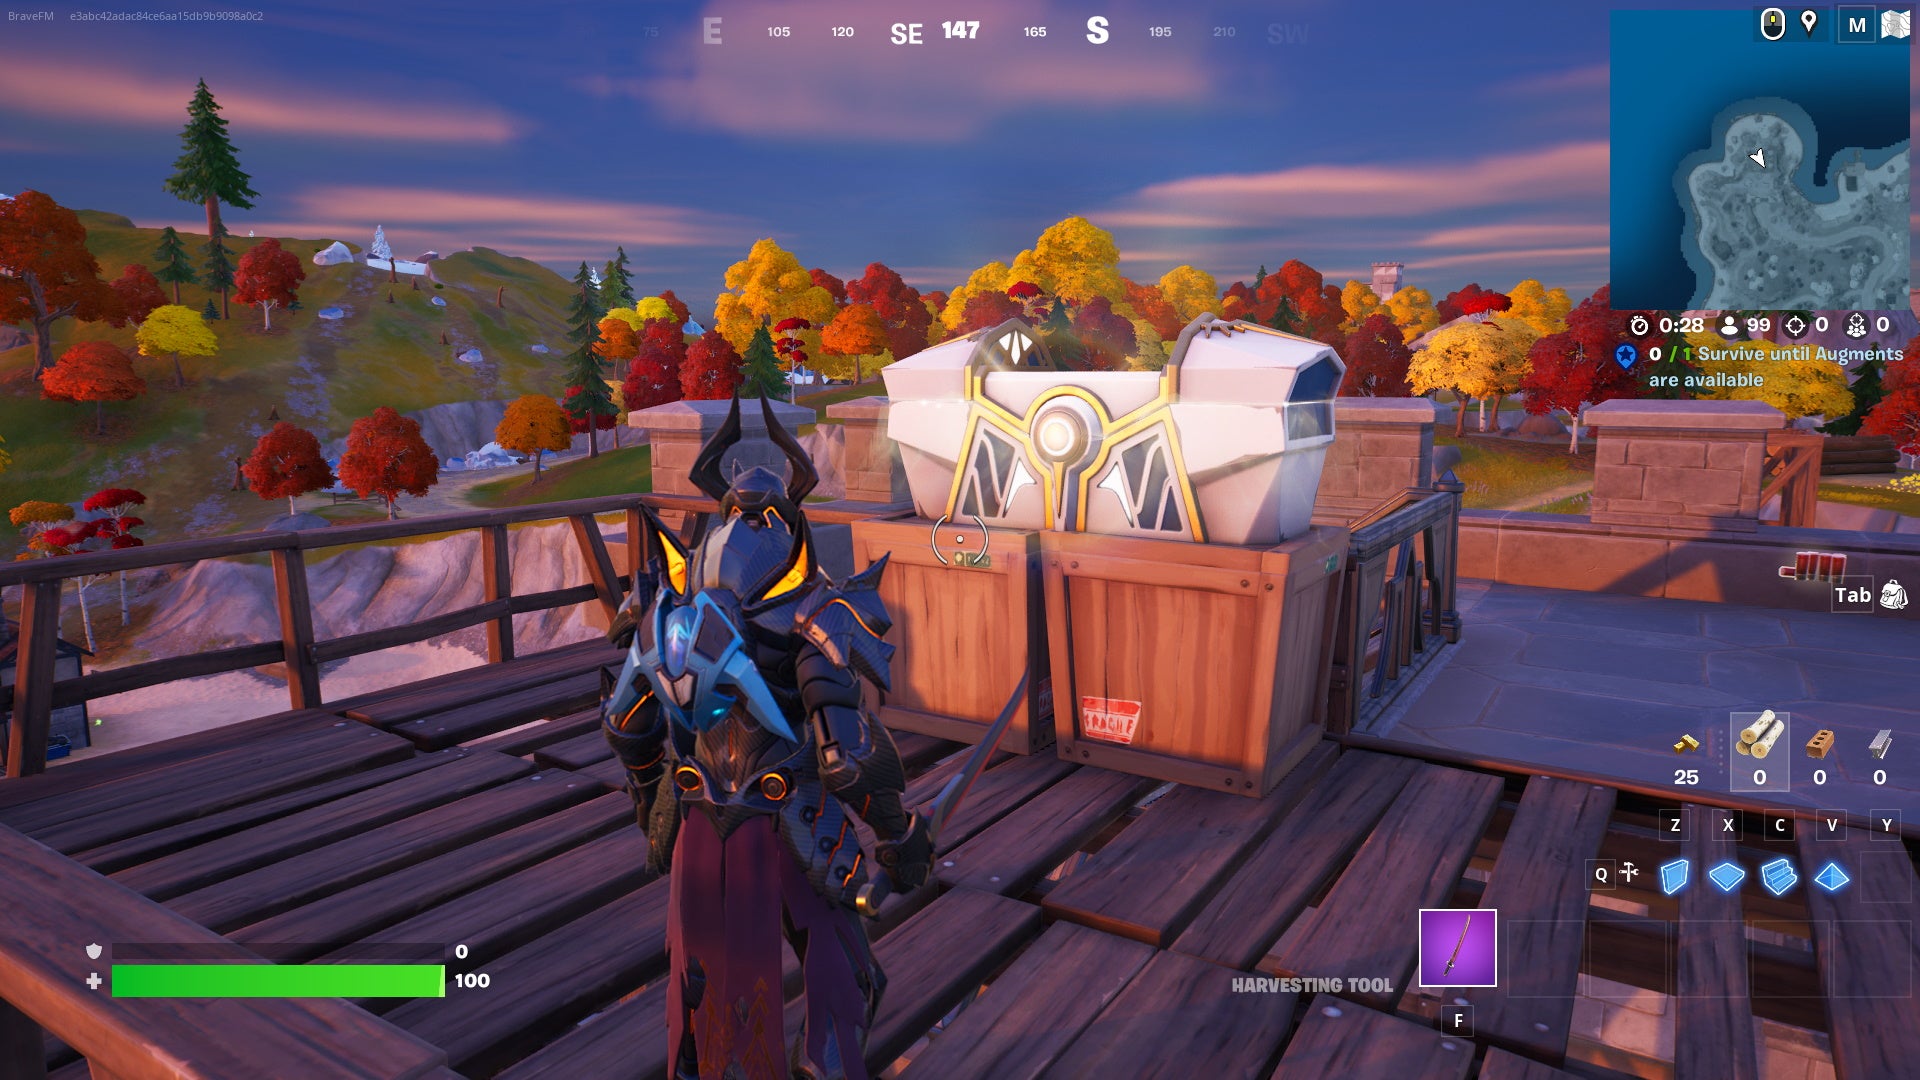 Fortnite Oathbound Chests: An animated character in pointy black armor stands on a wooden platform. In front of him is a large silver chest resting on two wooden boxes.